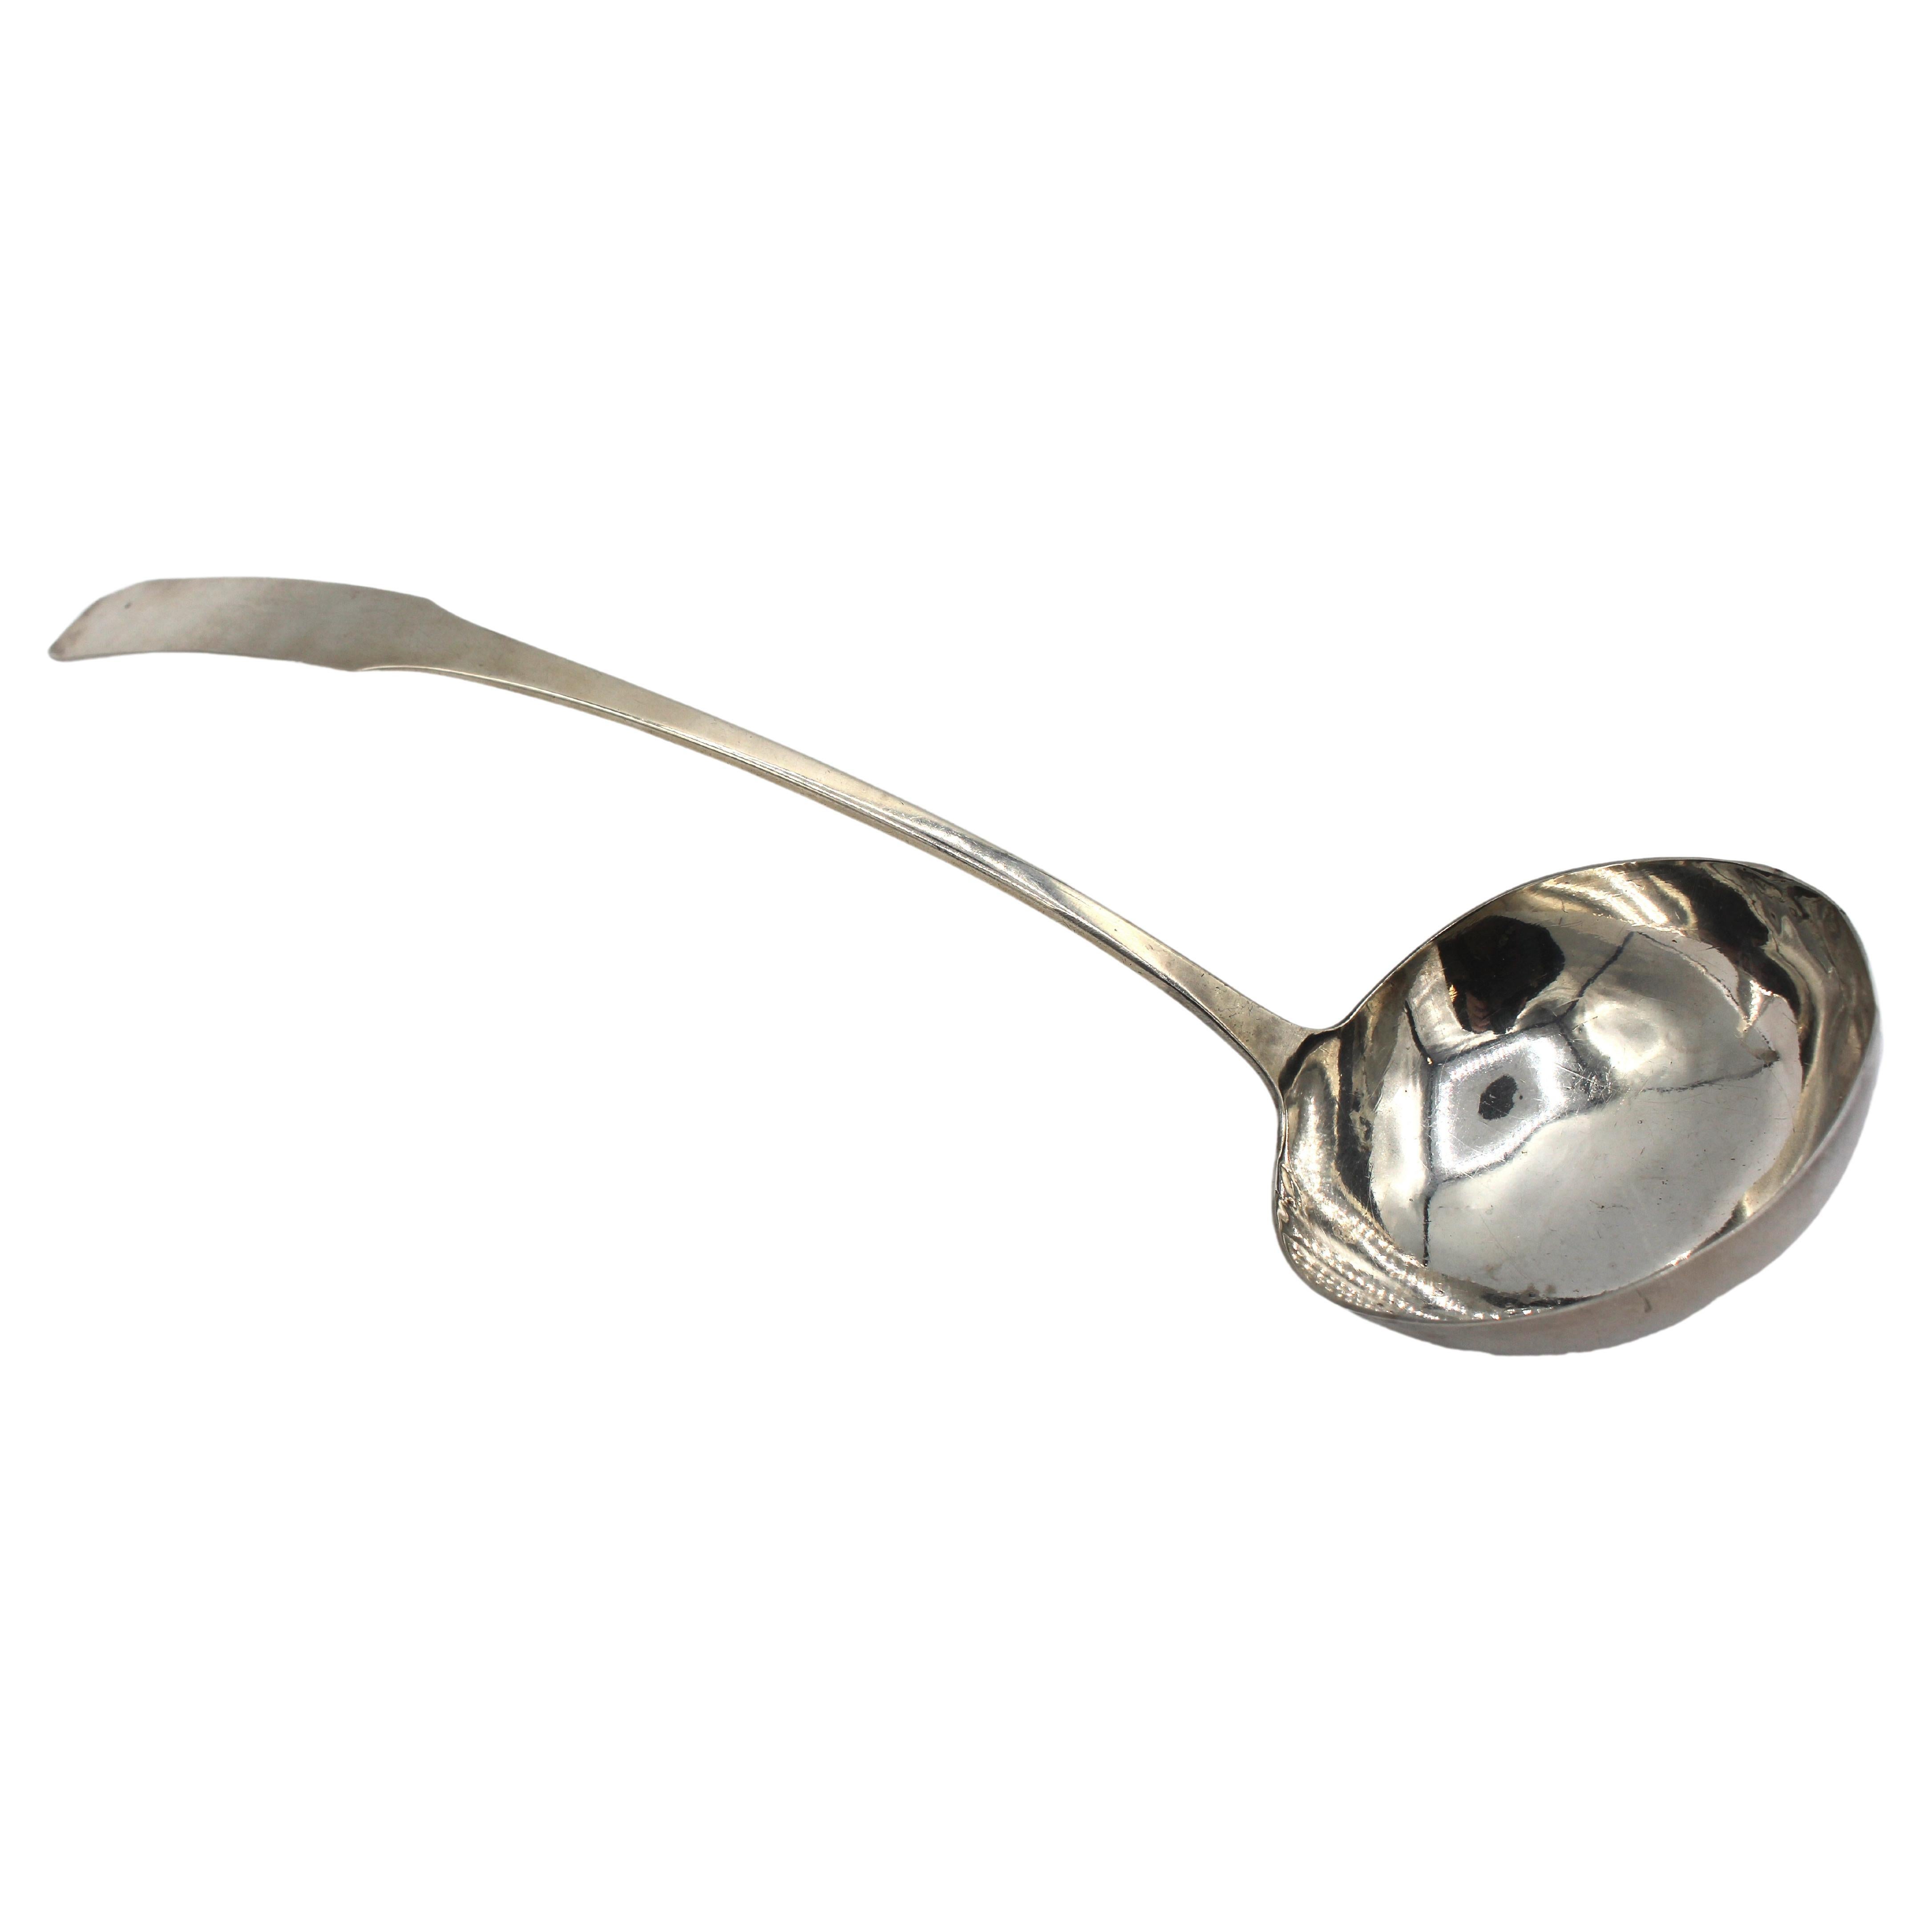 Early-Mid 19th Century Large Coffin-Fiddle Transitional Coin Silver Ladle For Sale